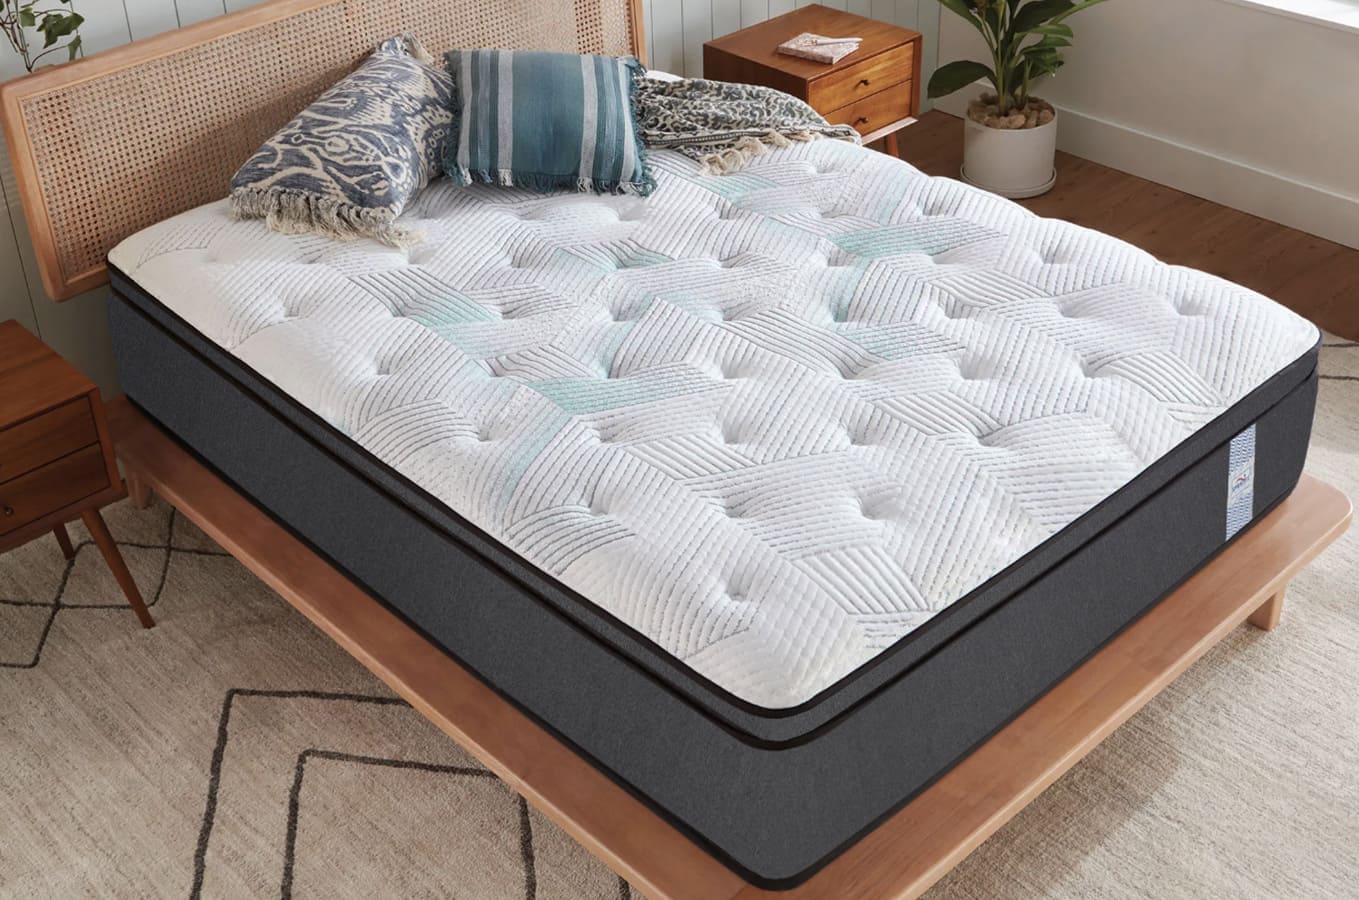 Choosing the Perfect Mattress for Your Best Night’s Sleep